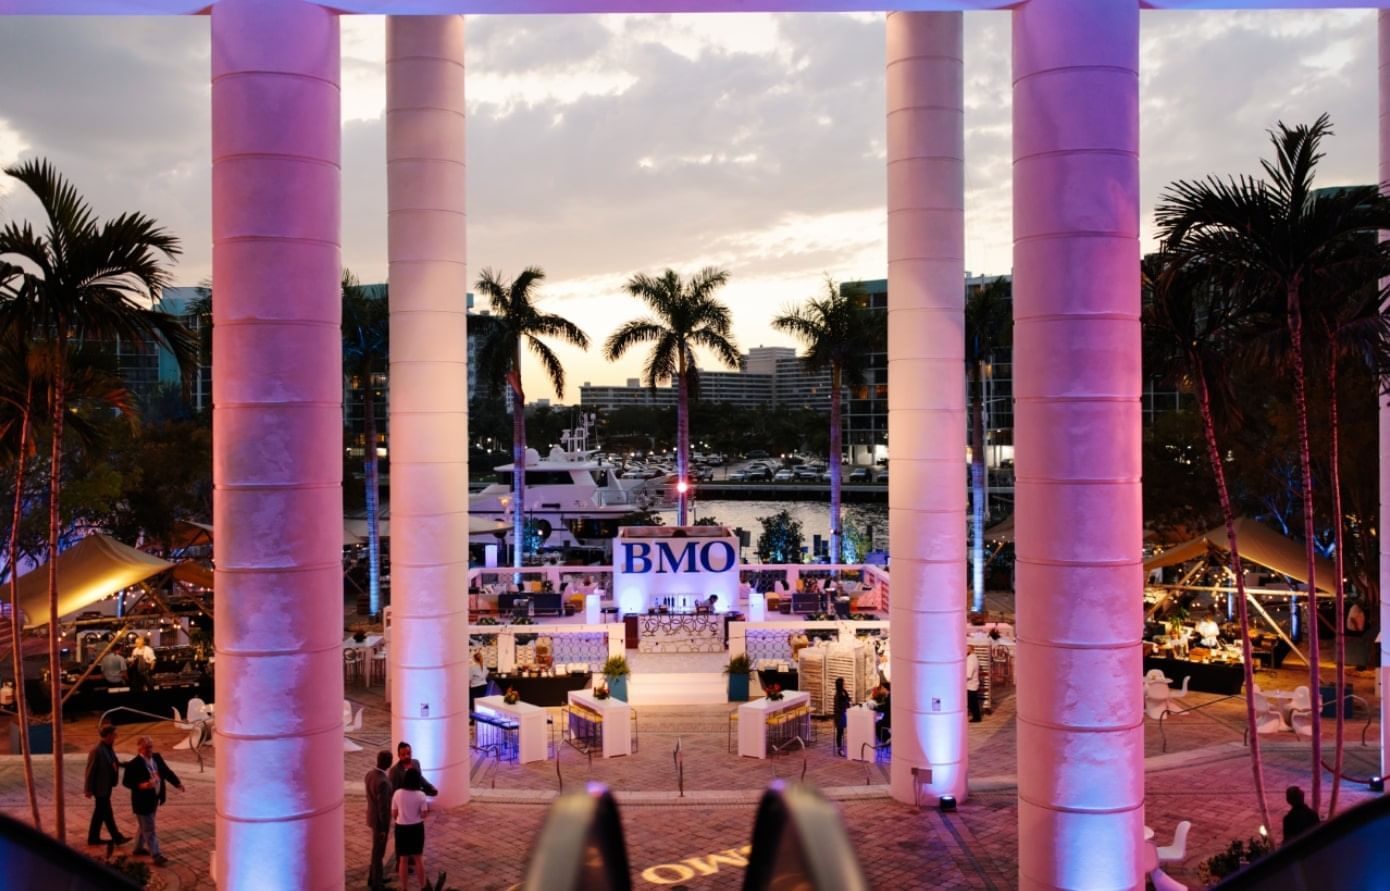 An event arranged outdoors at The Diplomat Resort